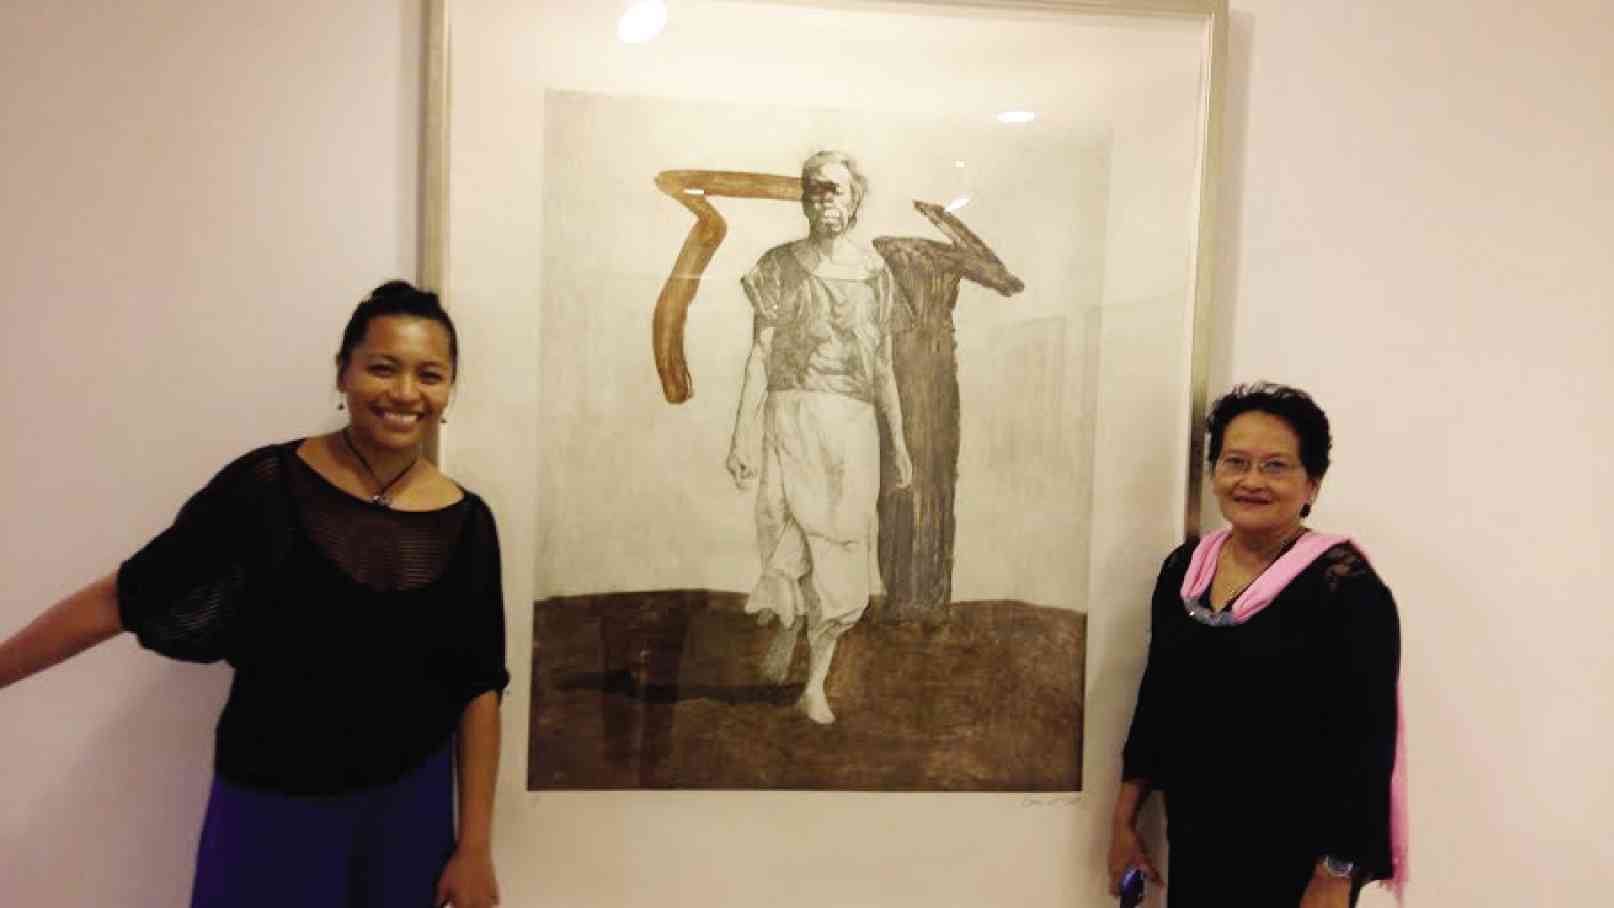 BANAUE Miclat-Janssen and Linda Faigao-Hall. “In 2008, a play of mine called ‘Sparrow’ was produced at the Theater Row, an off- Broadway venue. Banaue auditioned, and I was immediately impressed,” says Hall. ALMA CRUZ MICLAT